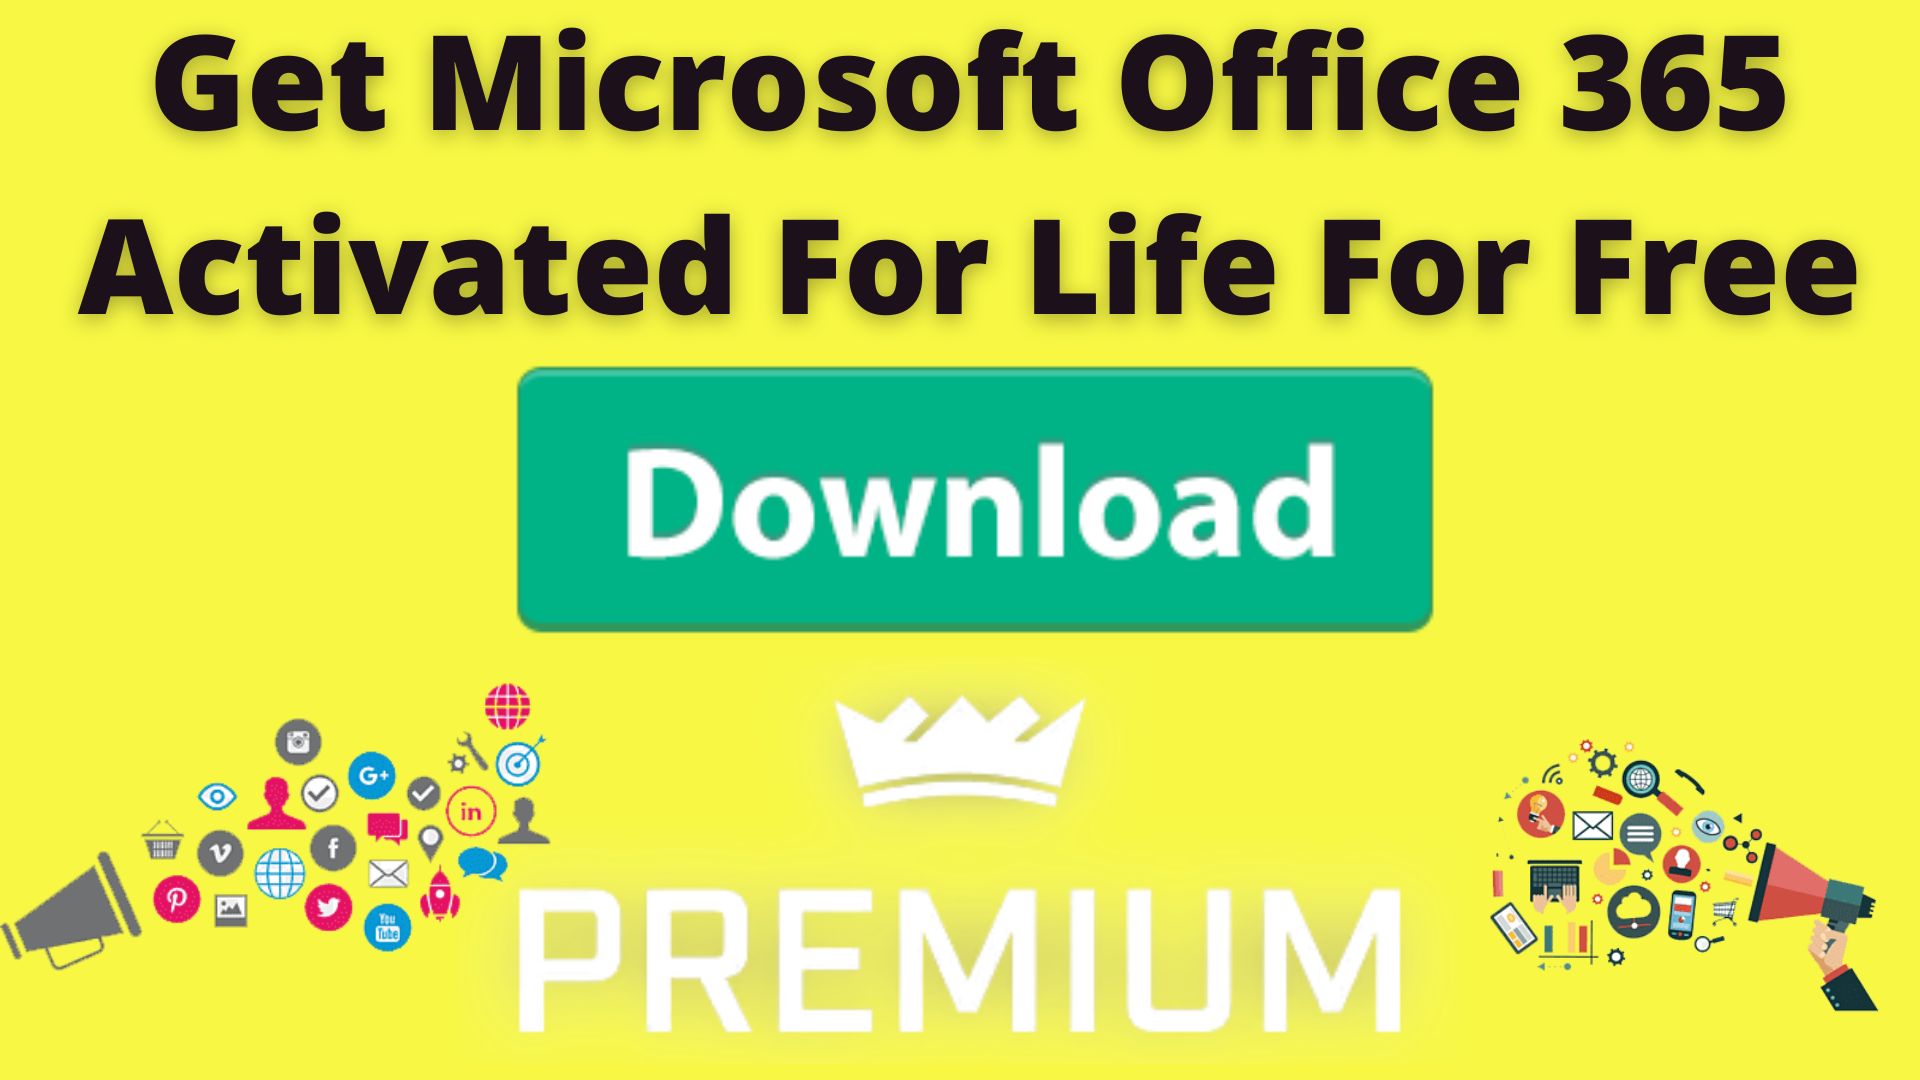 Get Microsoft Office 365 Activated For Life For Free